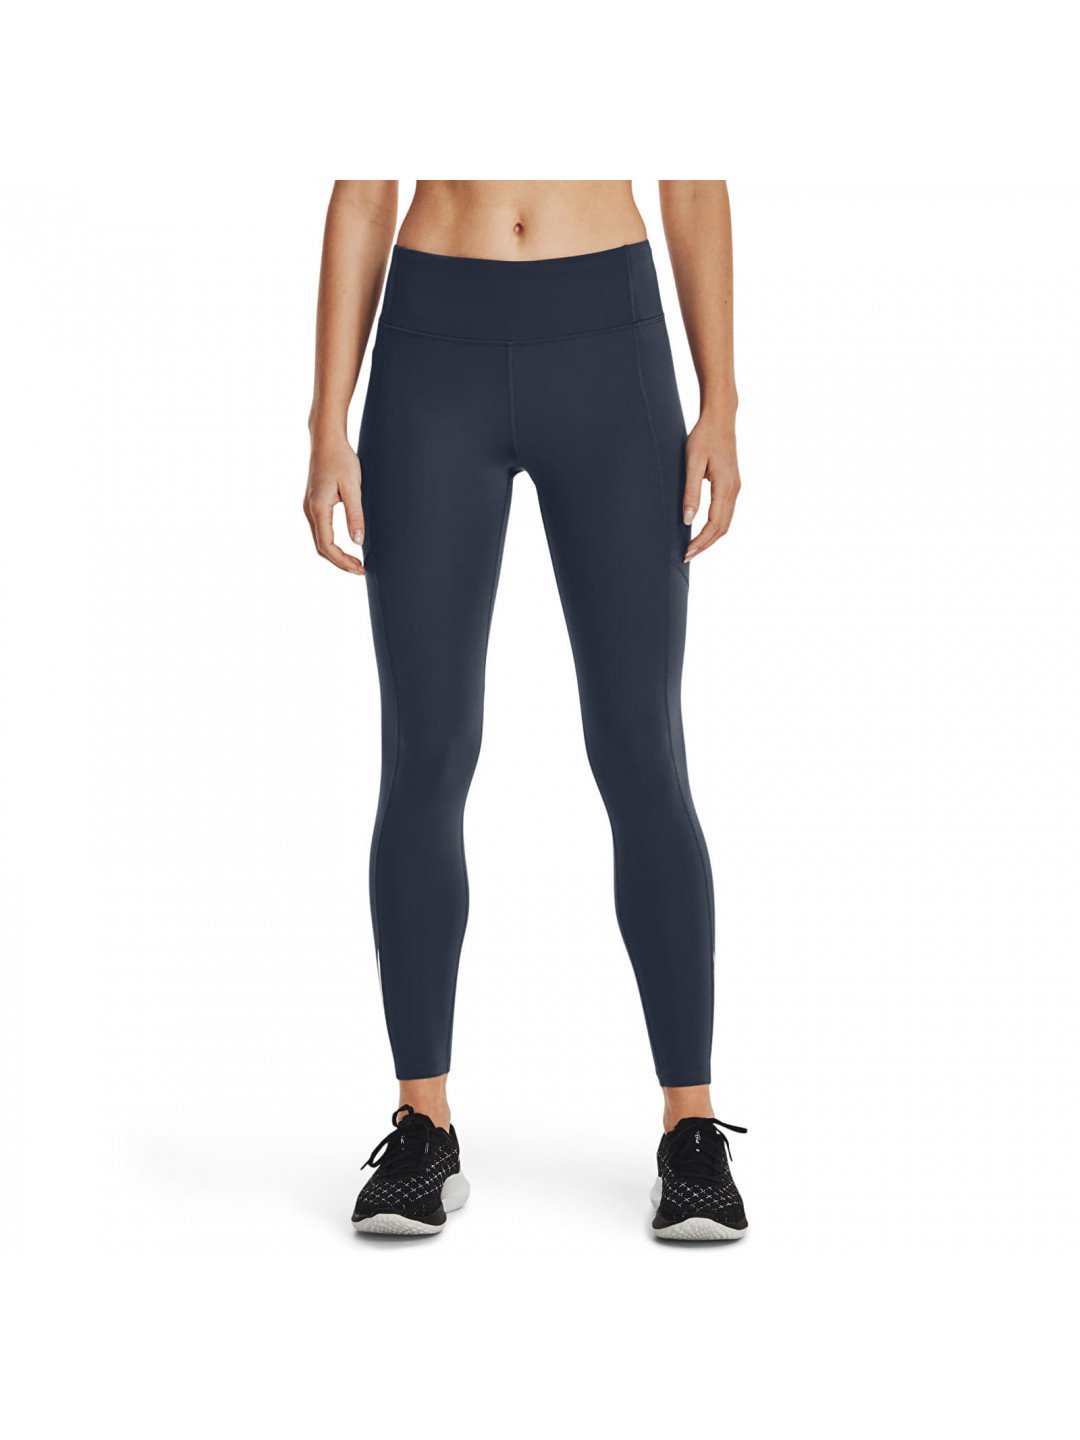 Under Armour Fly Fast 3 0 Tight Gray